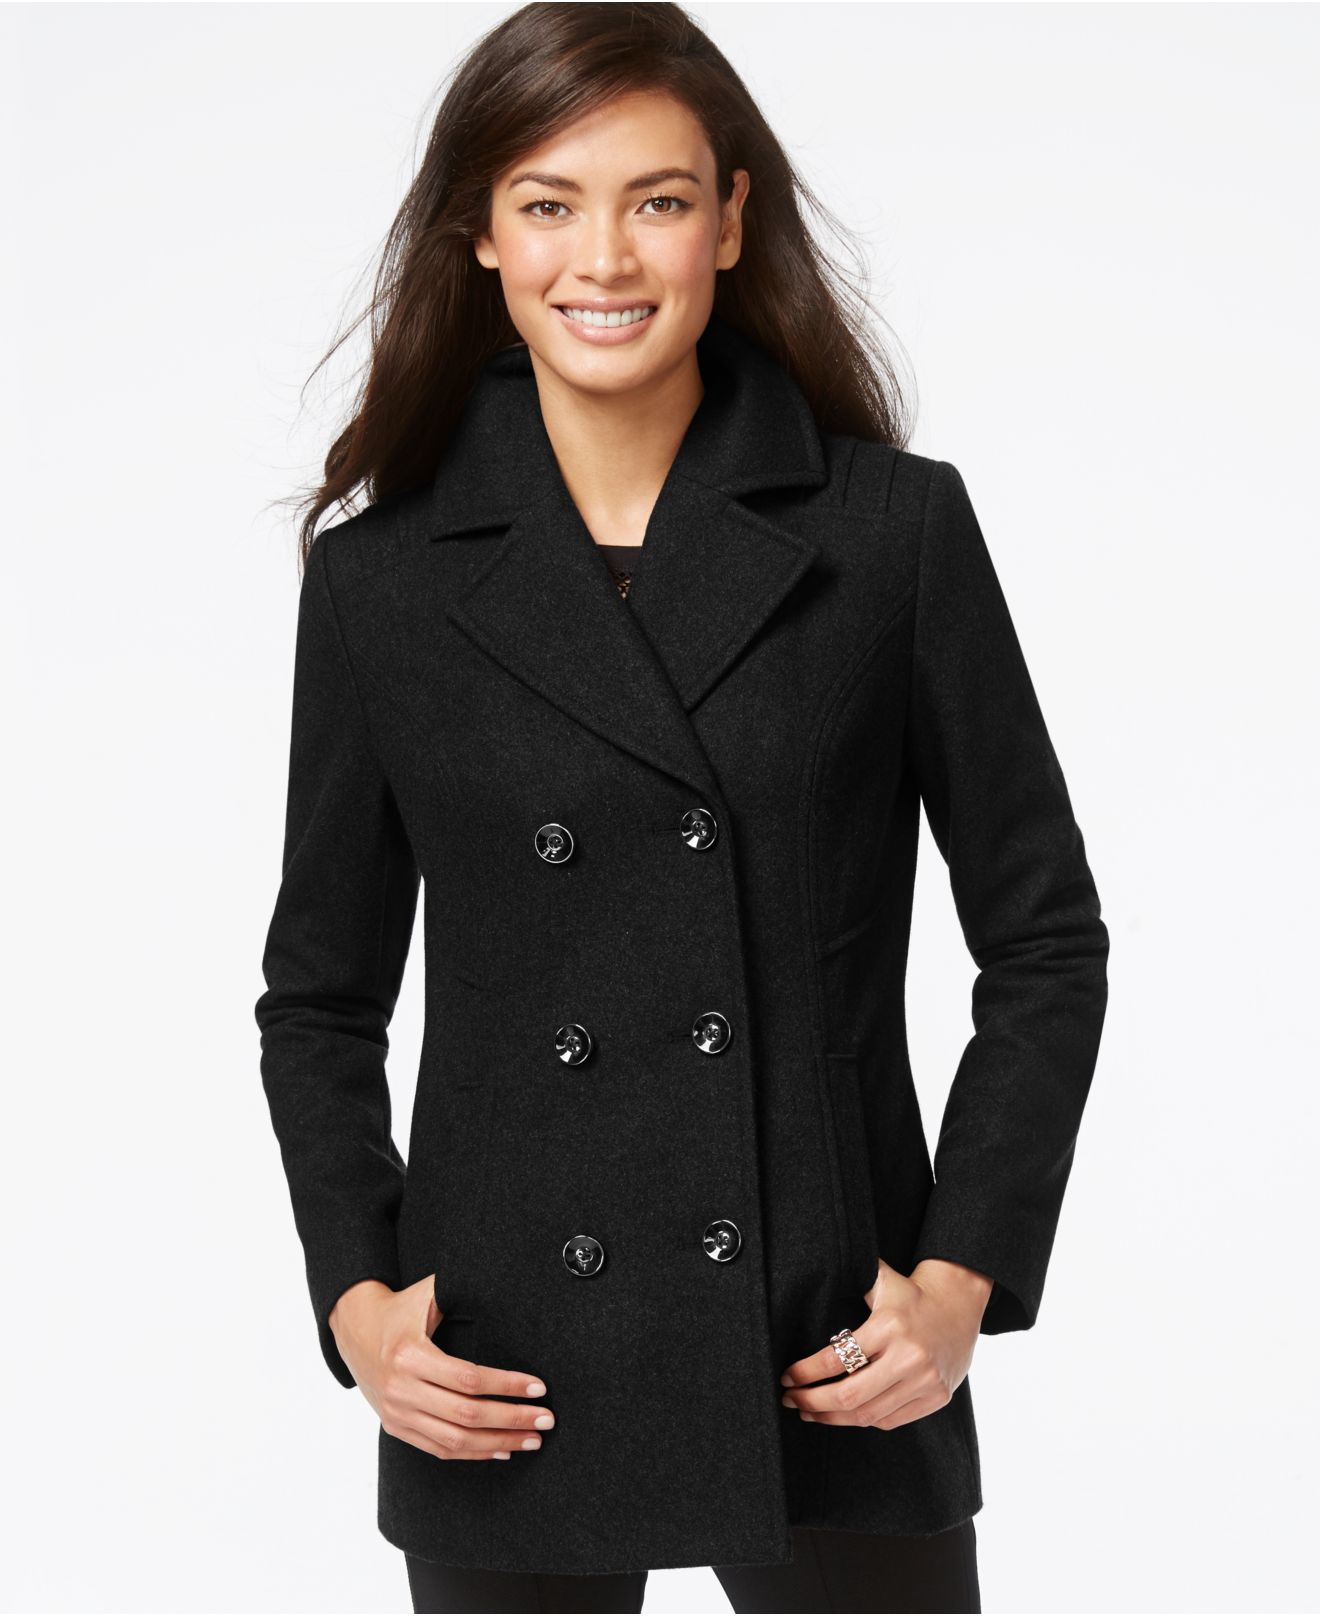 Lyst - Inc International Concepts Double-breasted Peacoat in Black